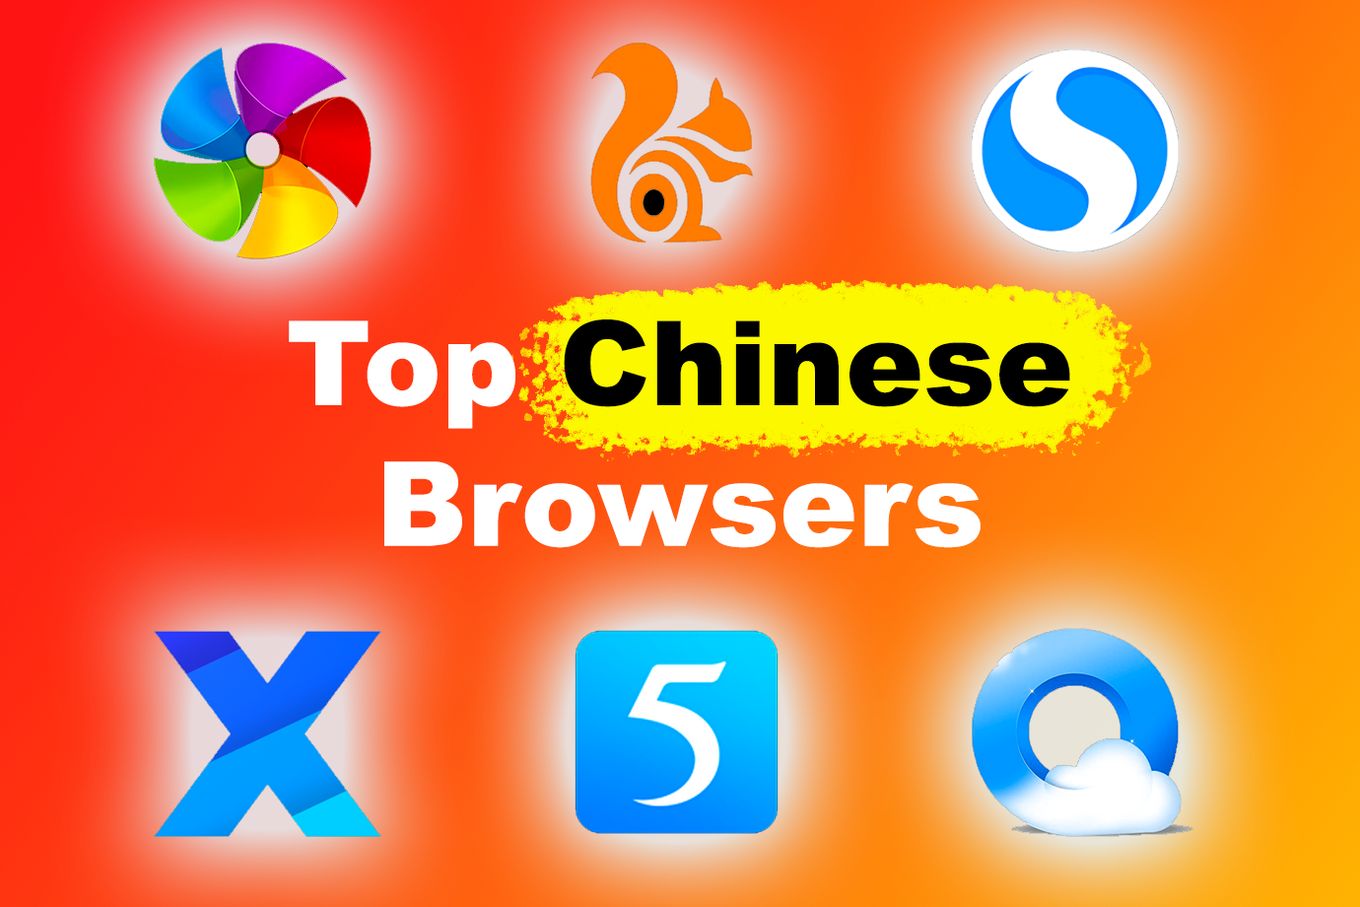 Chinese Browsers